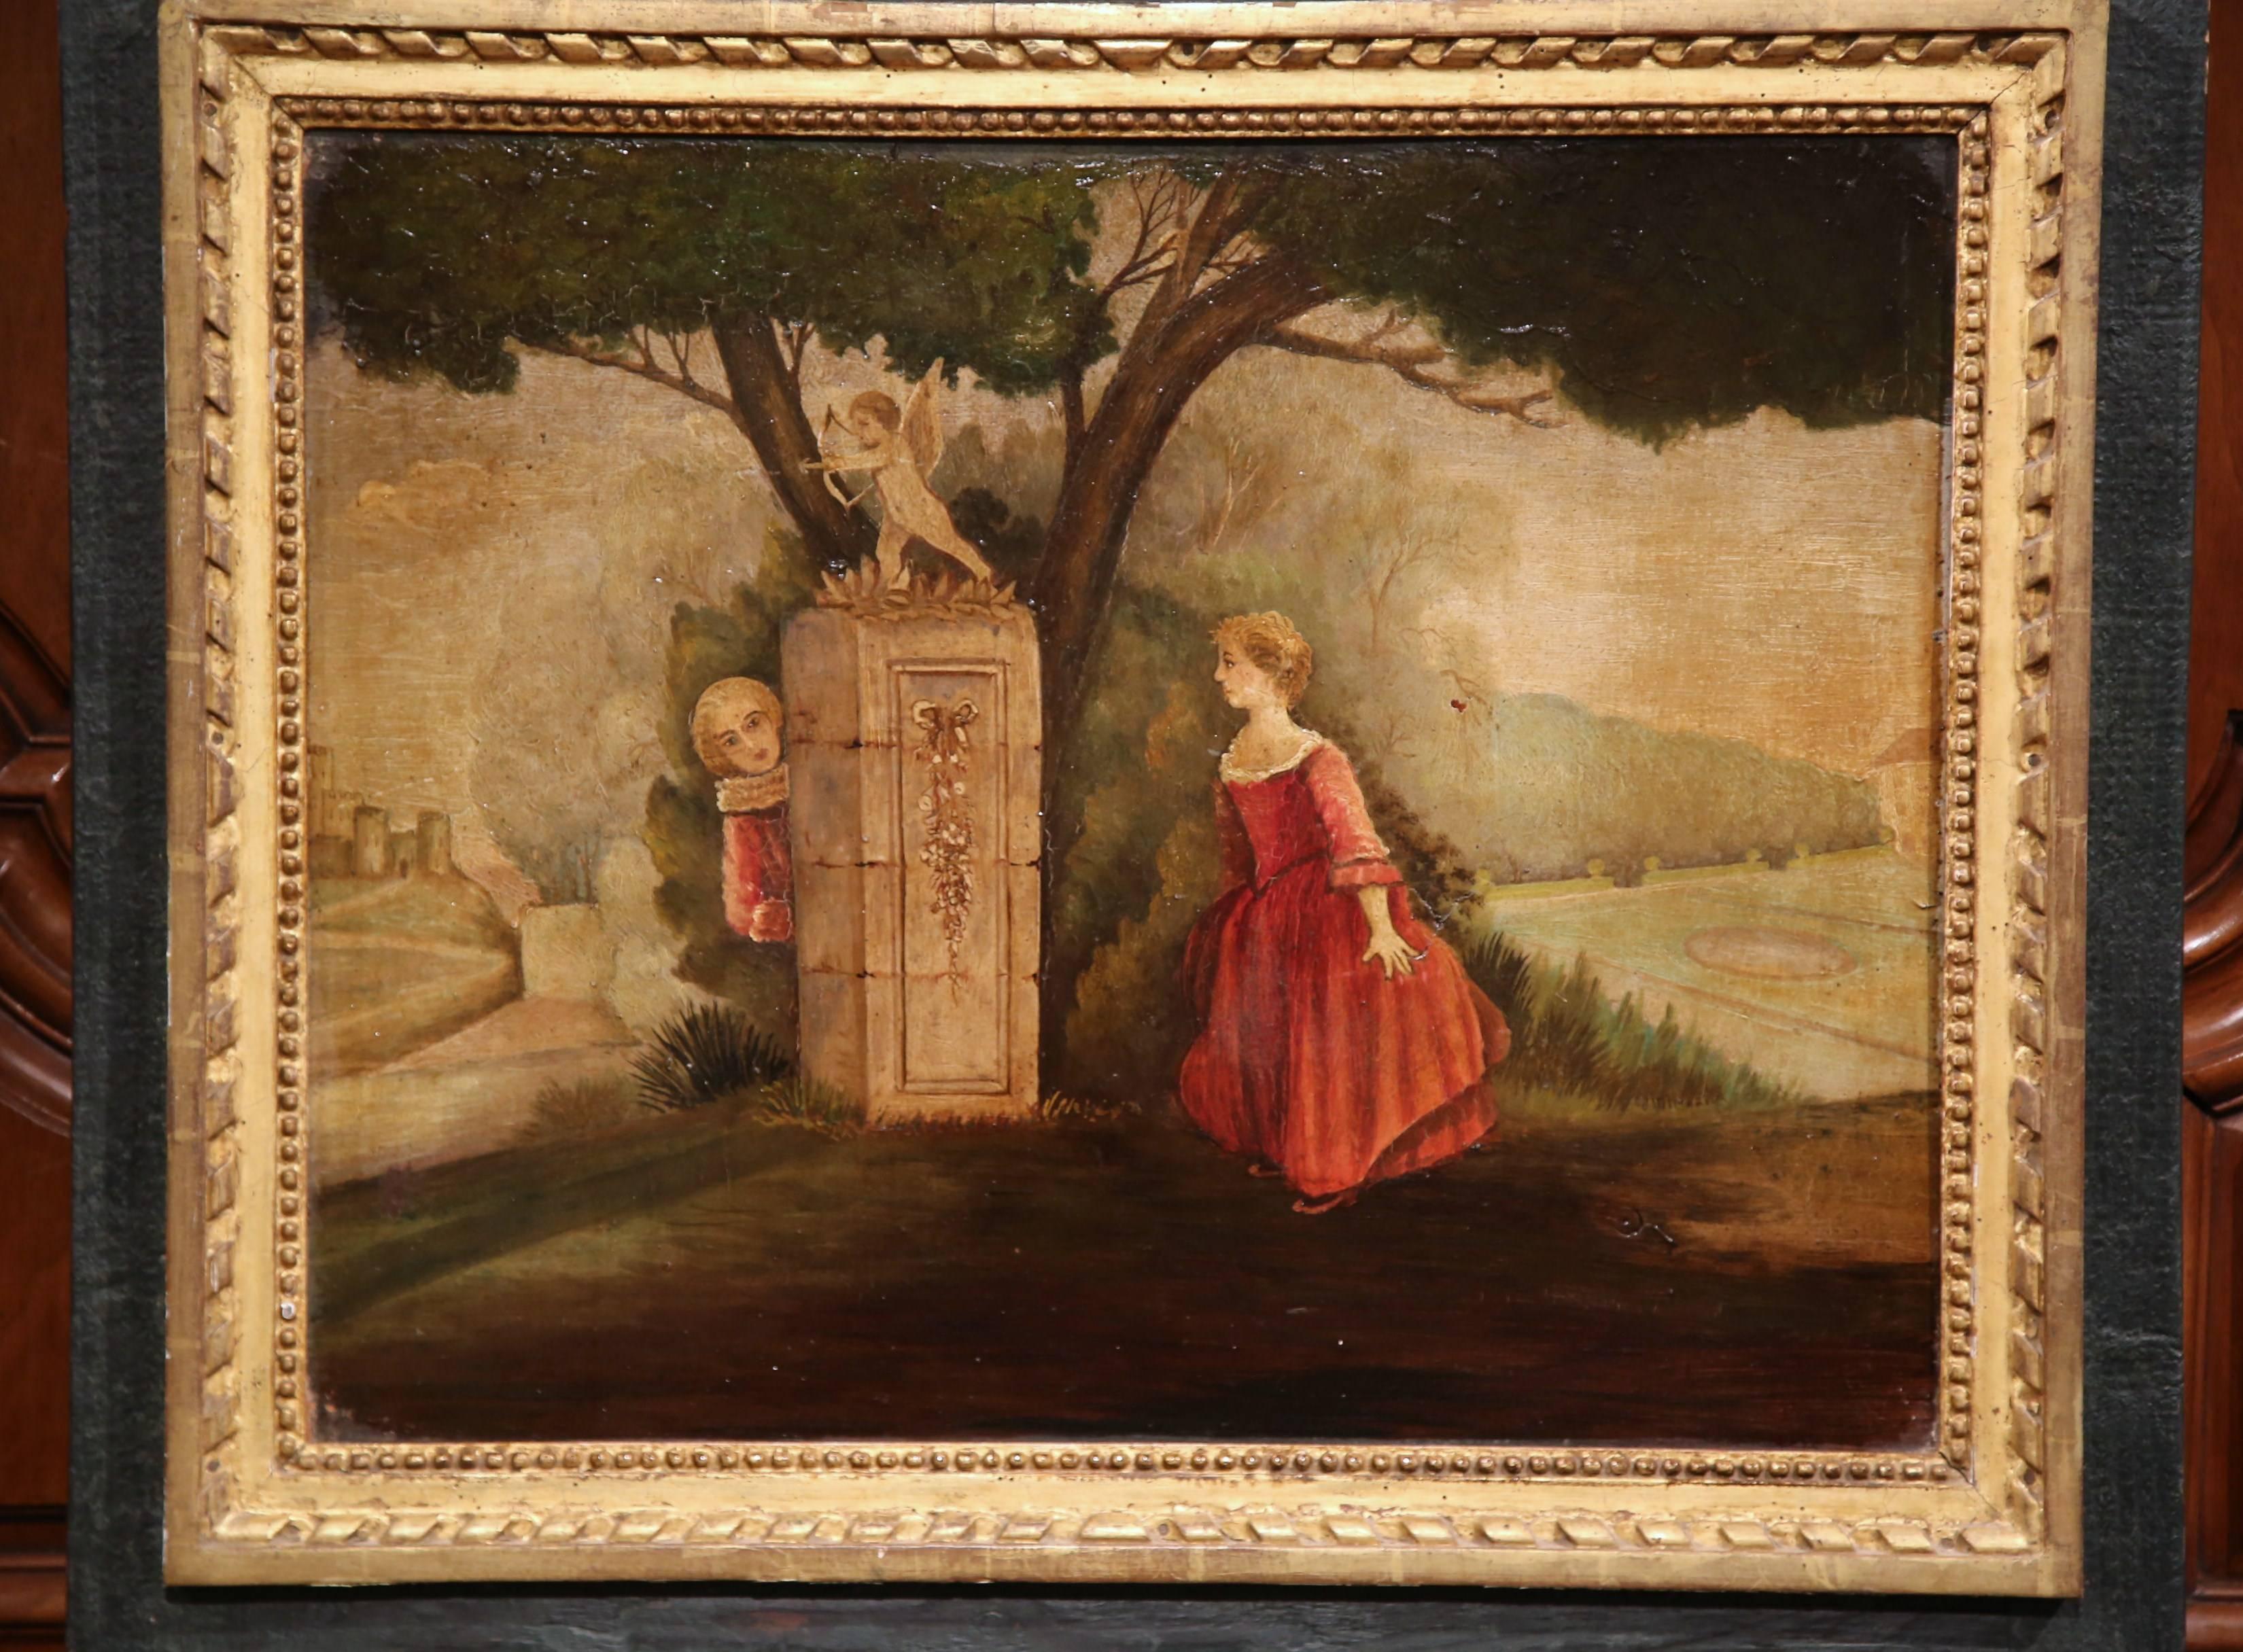 This elegant antique trumeau was created in France, circa 1840. The wall hanging decoration has two sections; a painting on canvas over a rectangular mirror. The bucolic scene depicts a gentleman and a woman playing hide and seek in a park; the